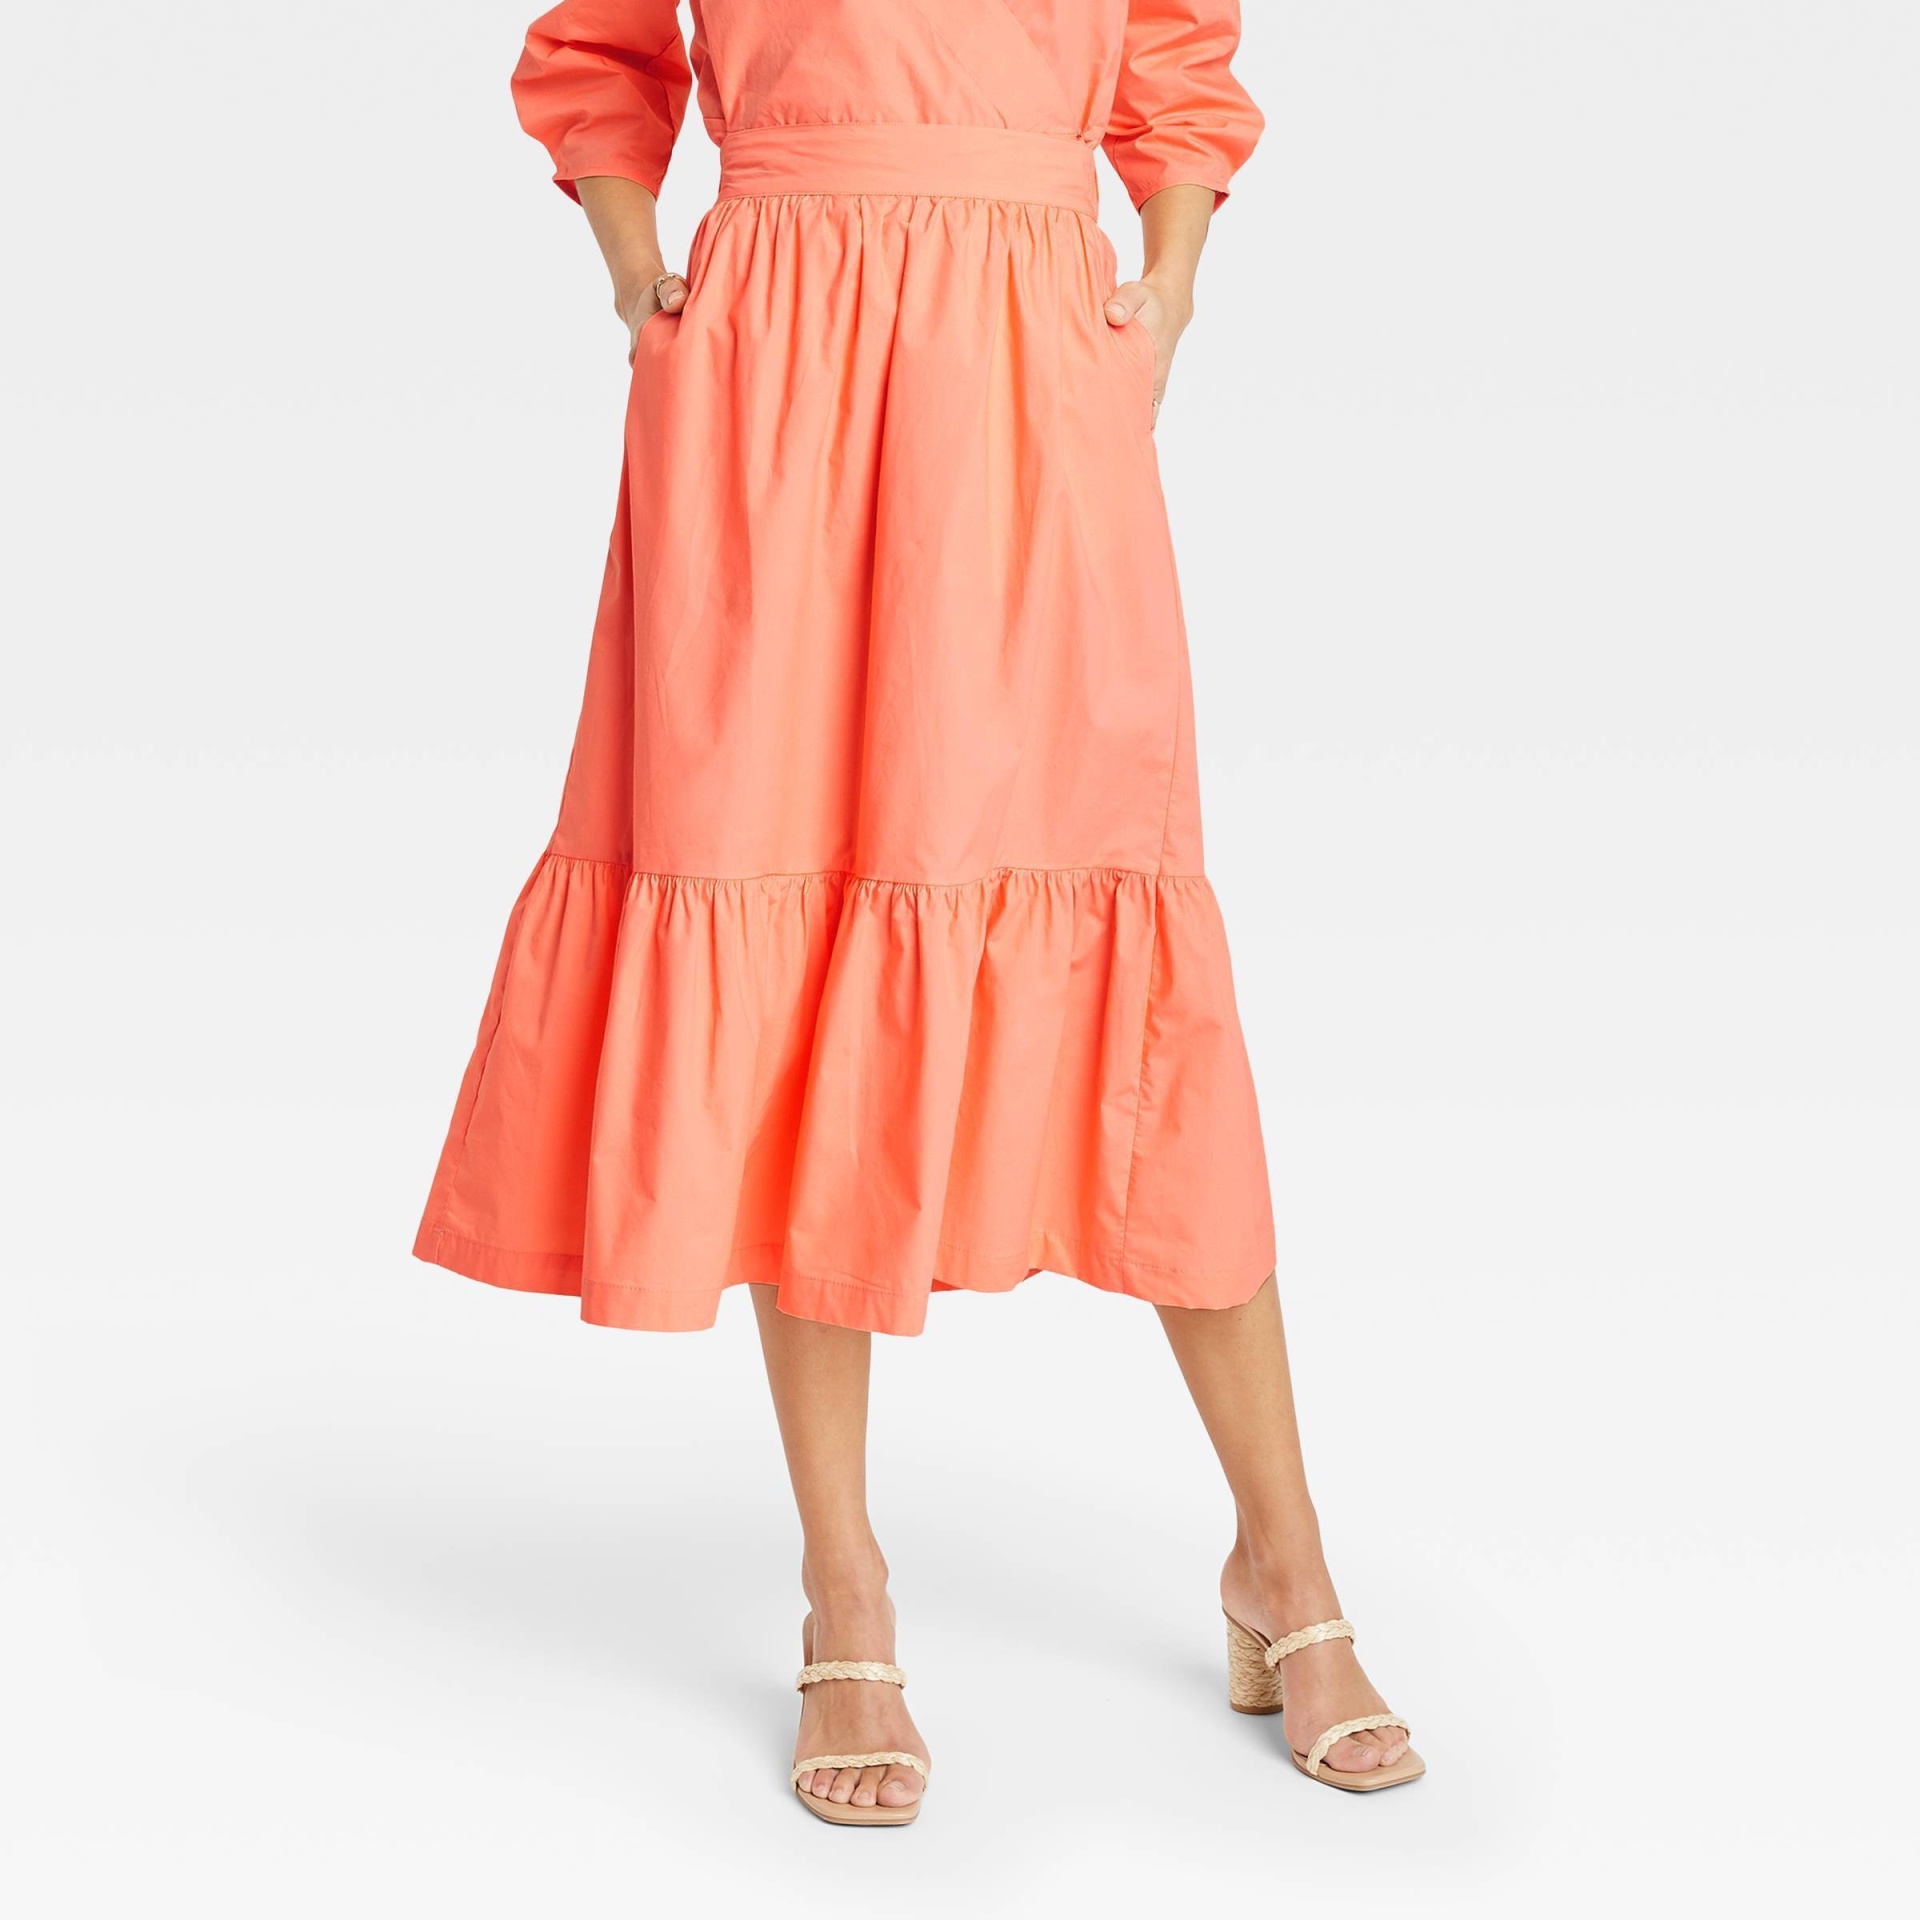 slide 1 of 3, Women's Tiered A-line Midi Skirt - A New Day Coral S, 1 ct